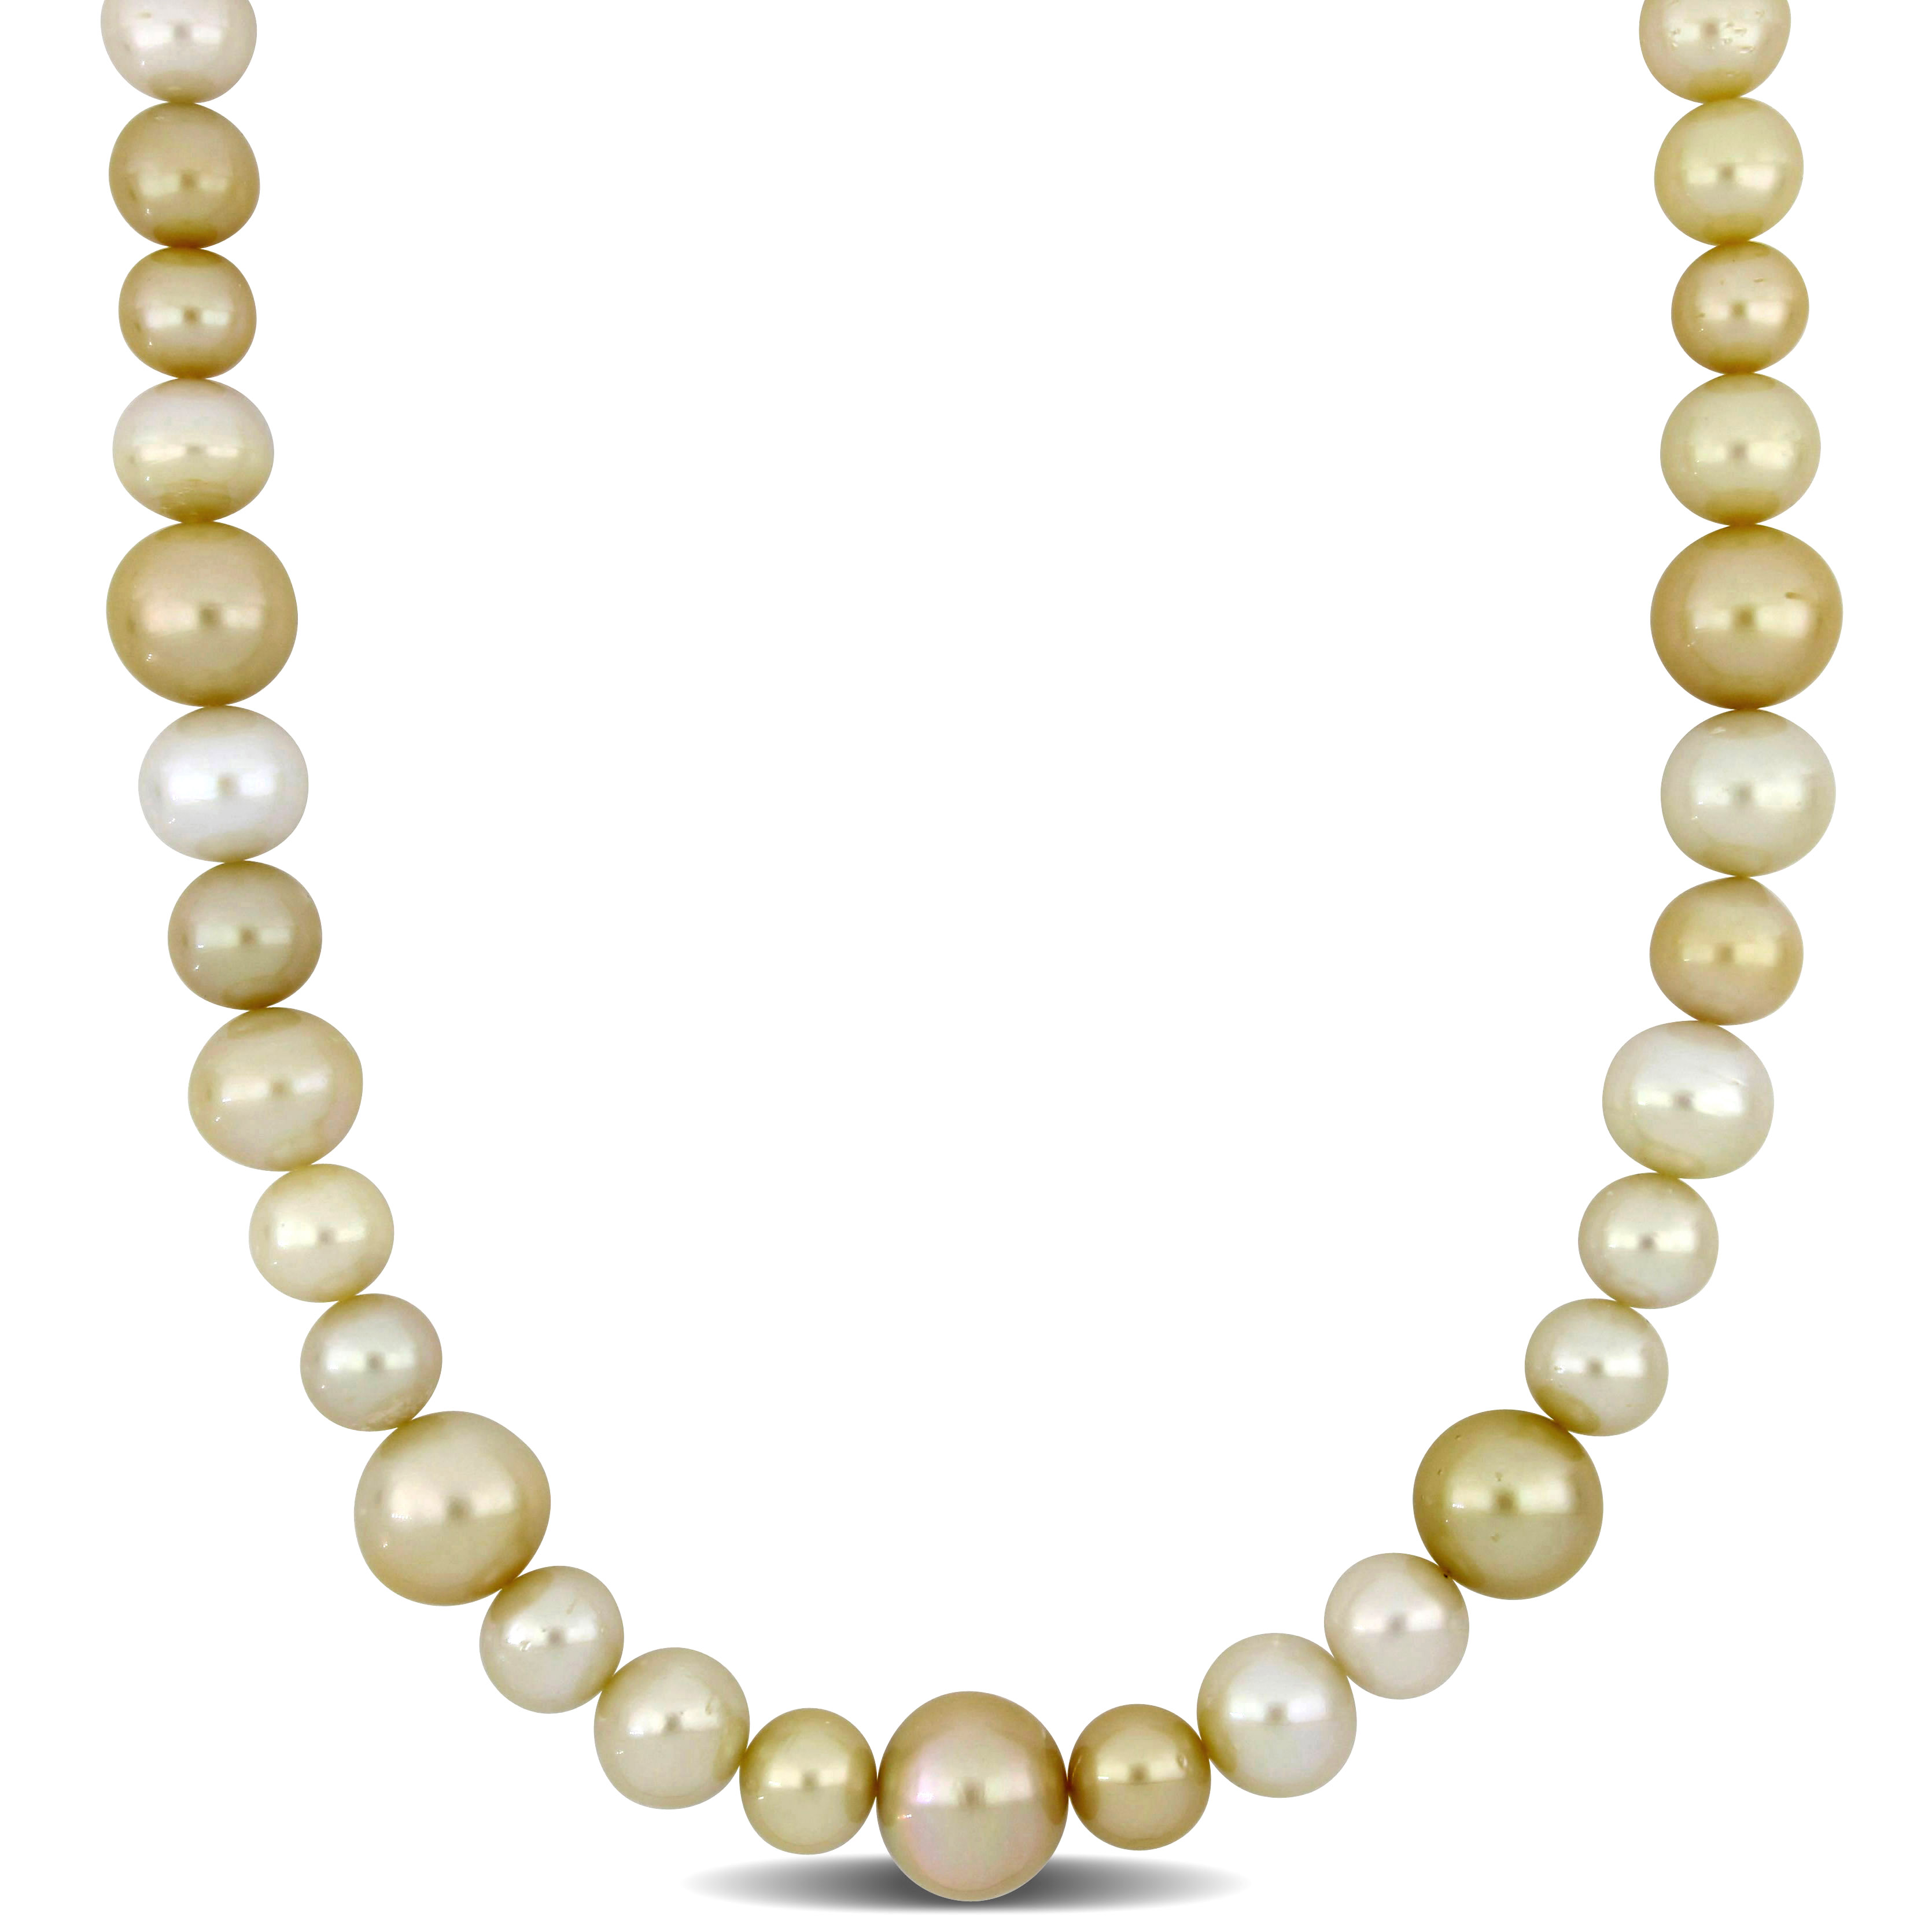 11-15 MM White and Golden South Sea Cultured Pearl Necklace in 14k Yellow Gold - 18 in